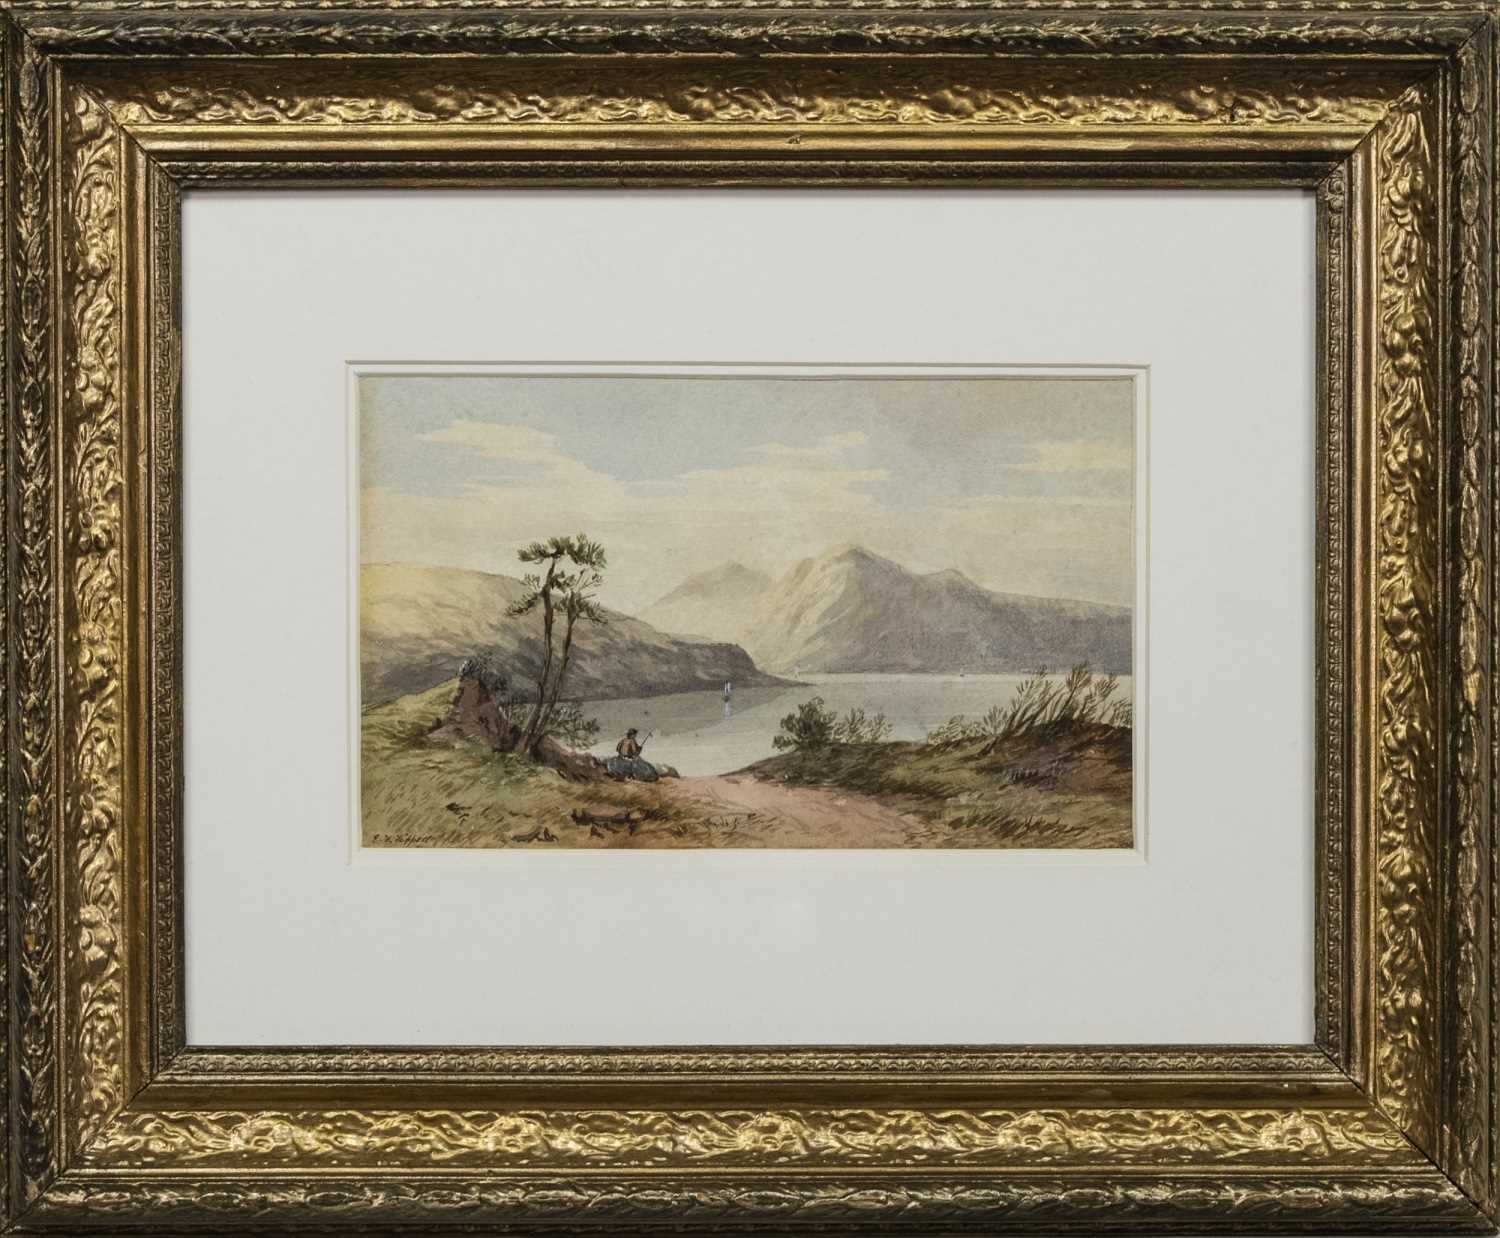 Lot 475 - HIGHLAND SCENE WITH FISHERMAN, A WATERCOLOUR BY E F TIPPETT